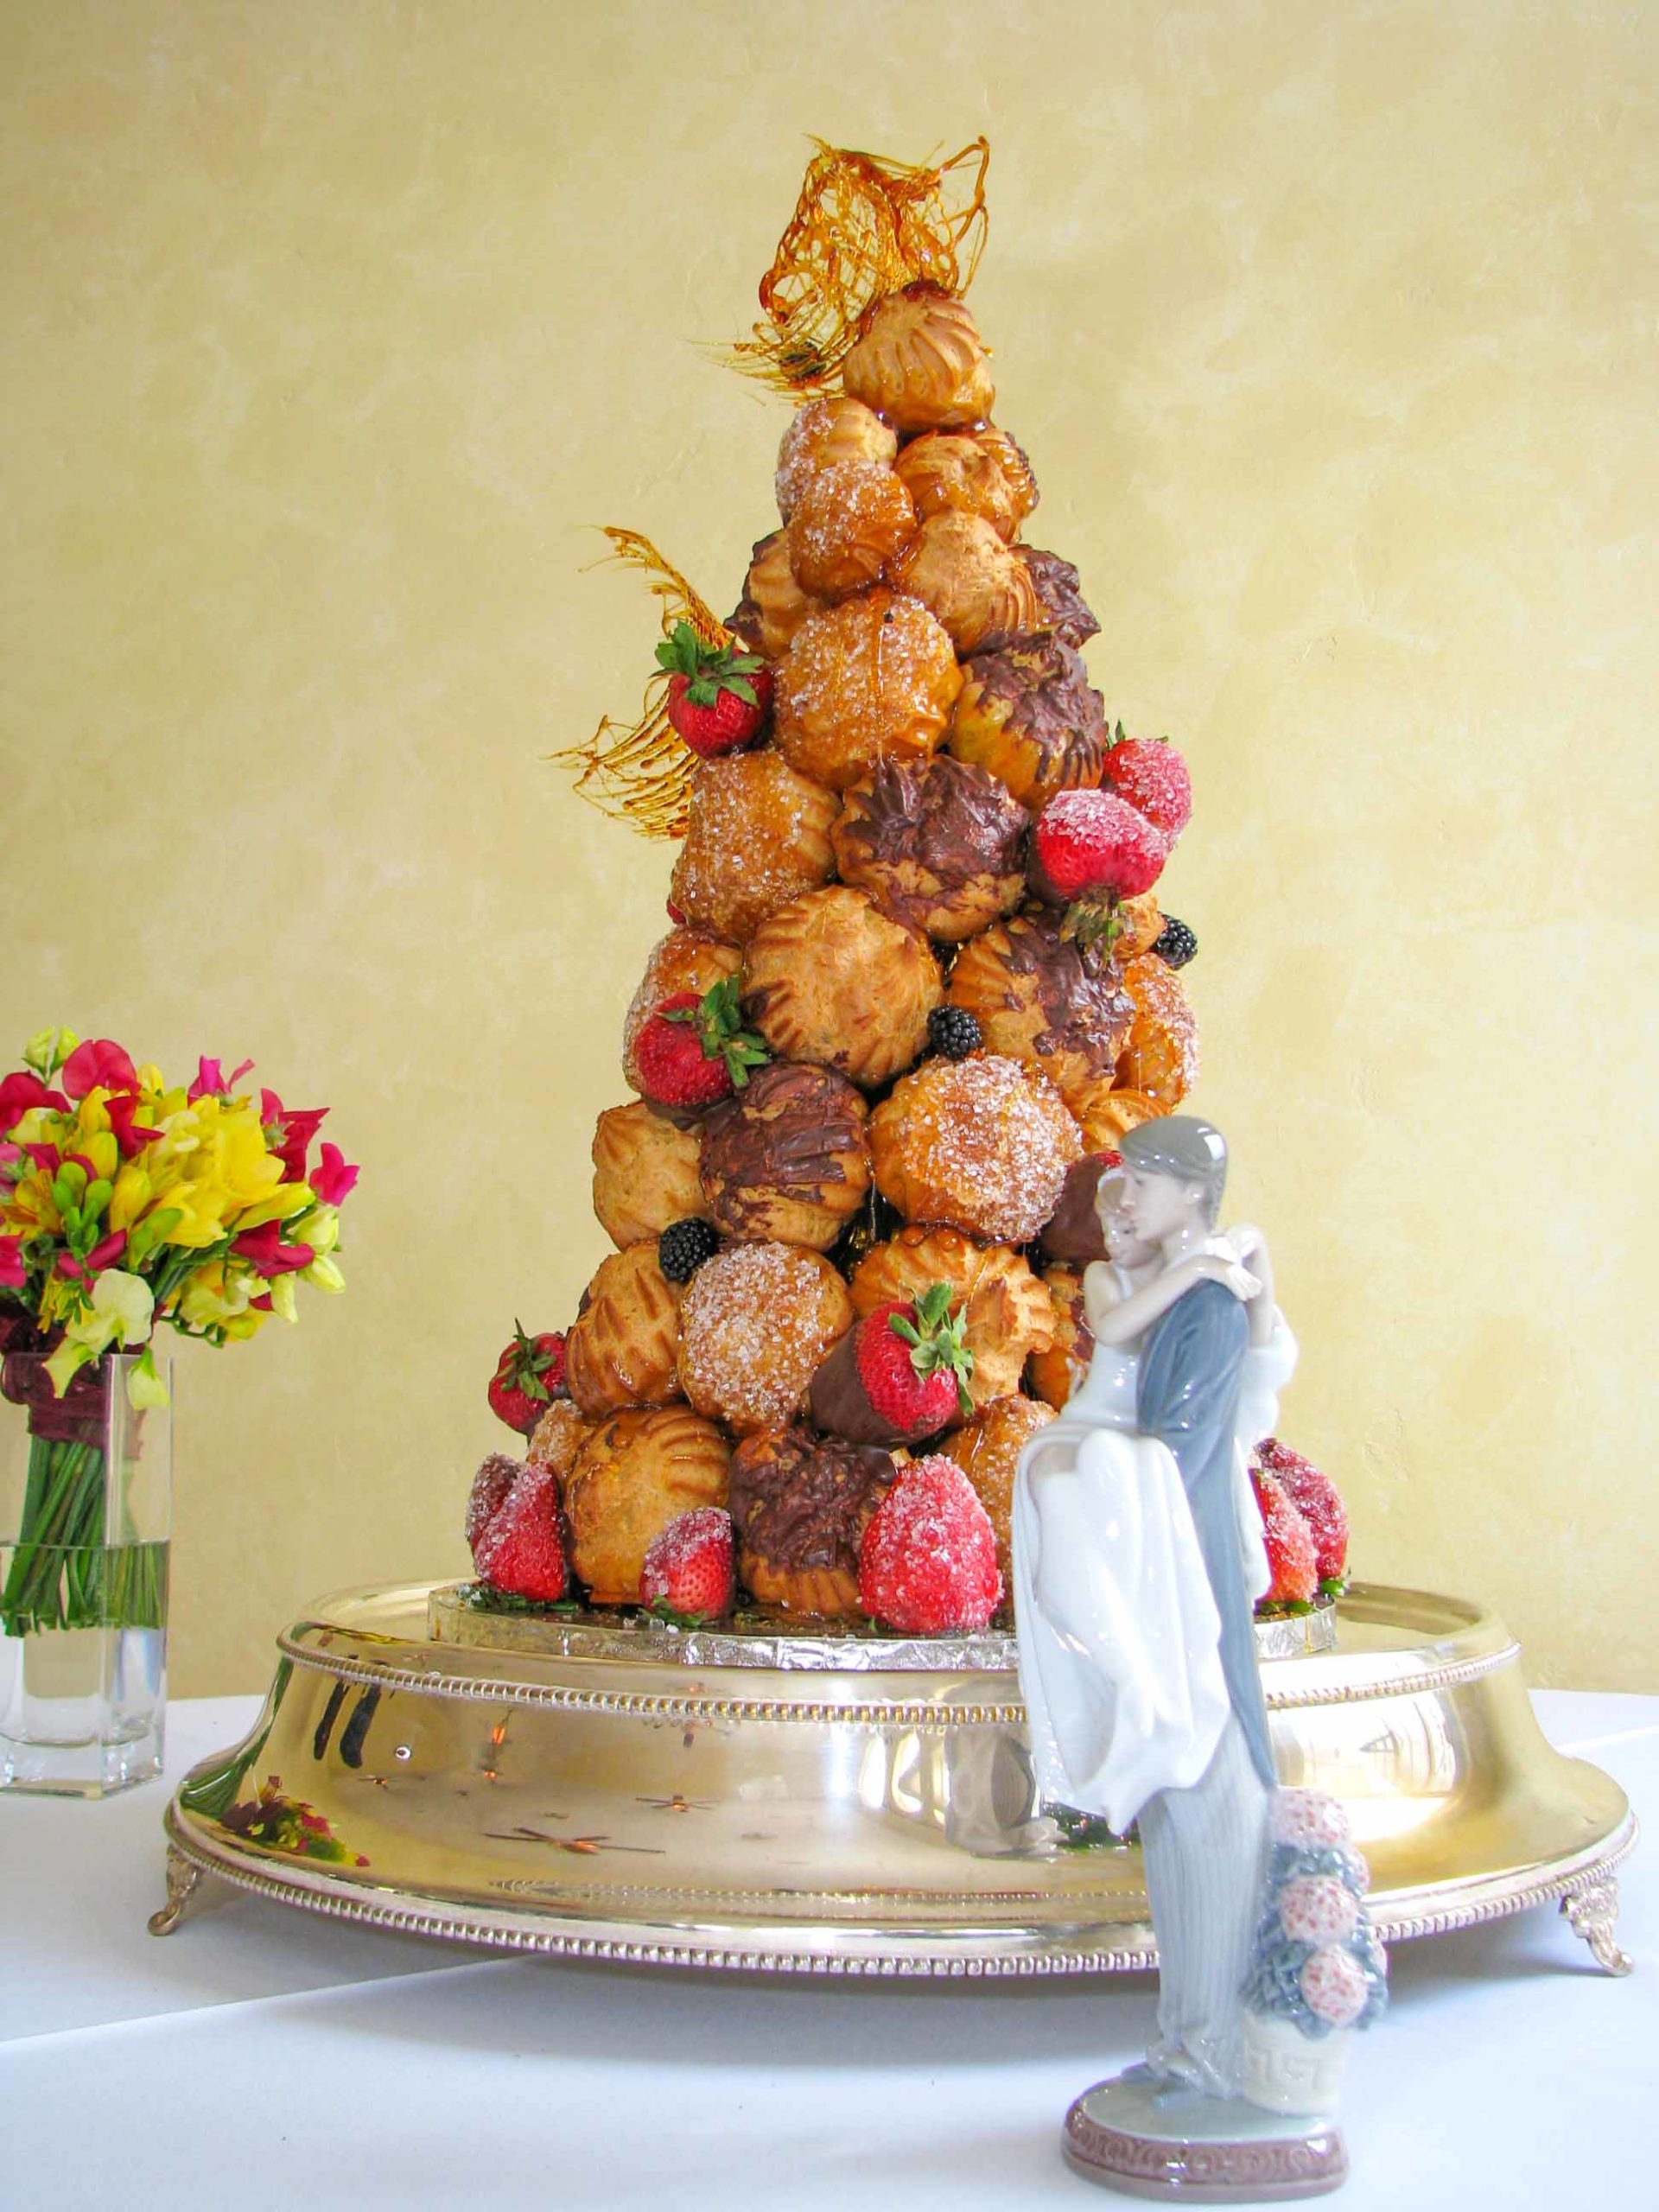 Croquembouche © Eric Baker - licence [CC BY-SA 3.0] from Wikimedia Commons